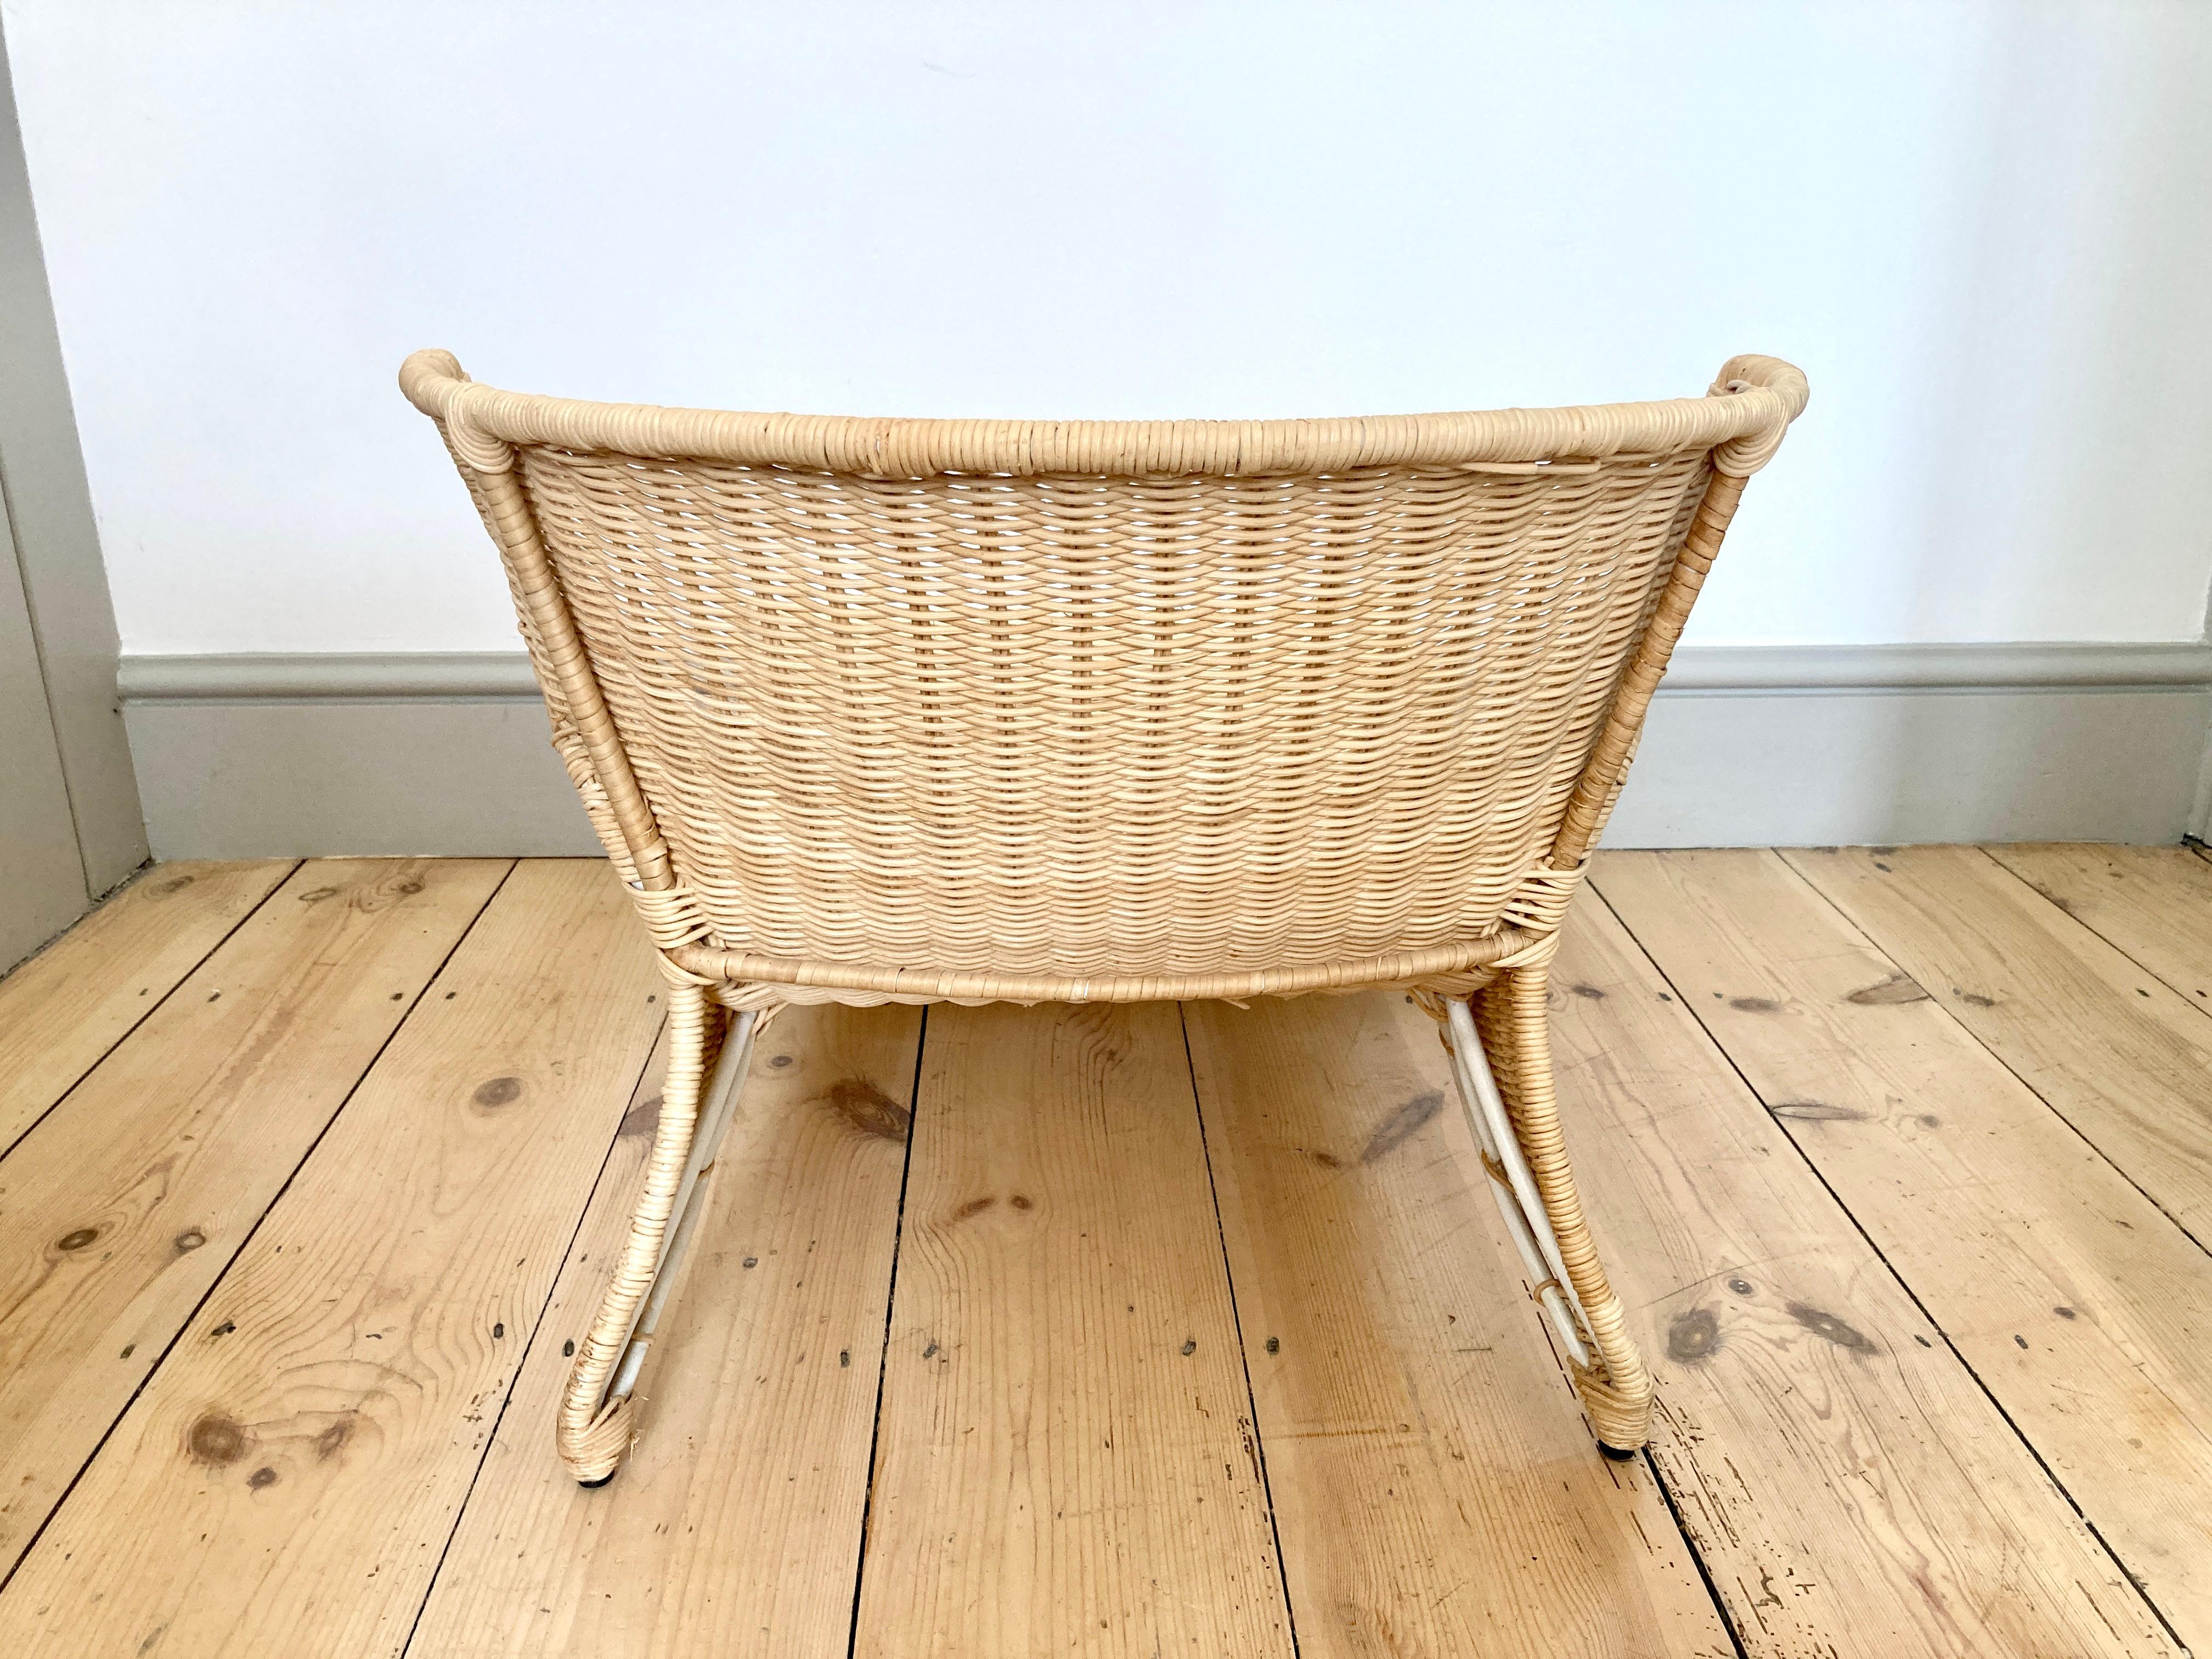 Low Lounge Chair / Chaise Longue by Monika Mulder for Ikea Savo Natural Rattan 7